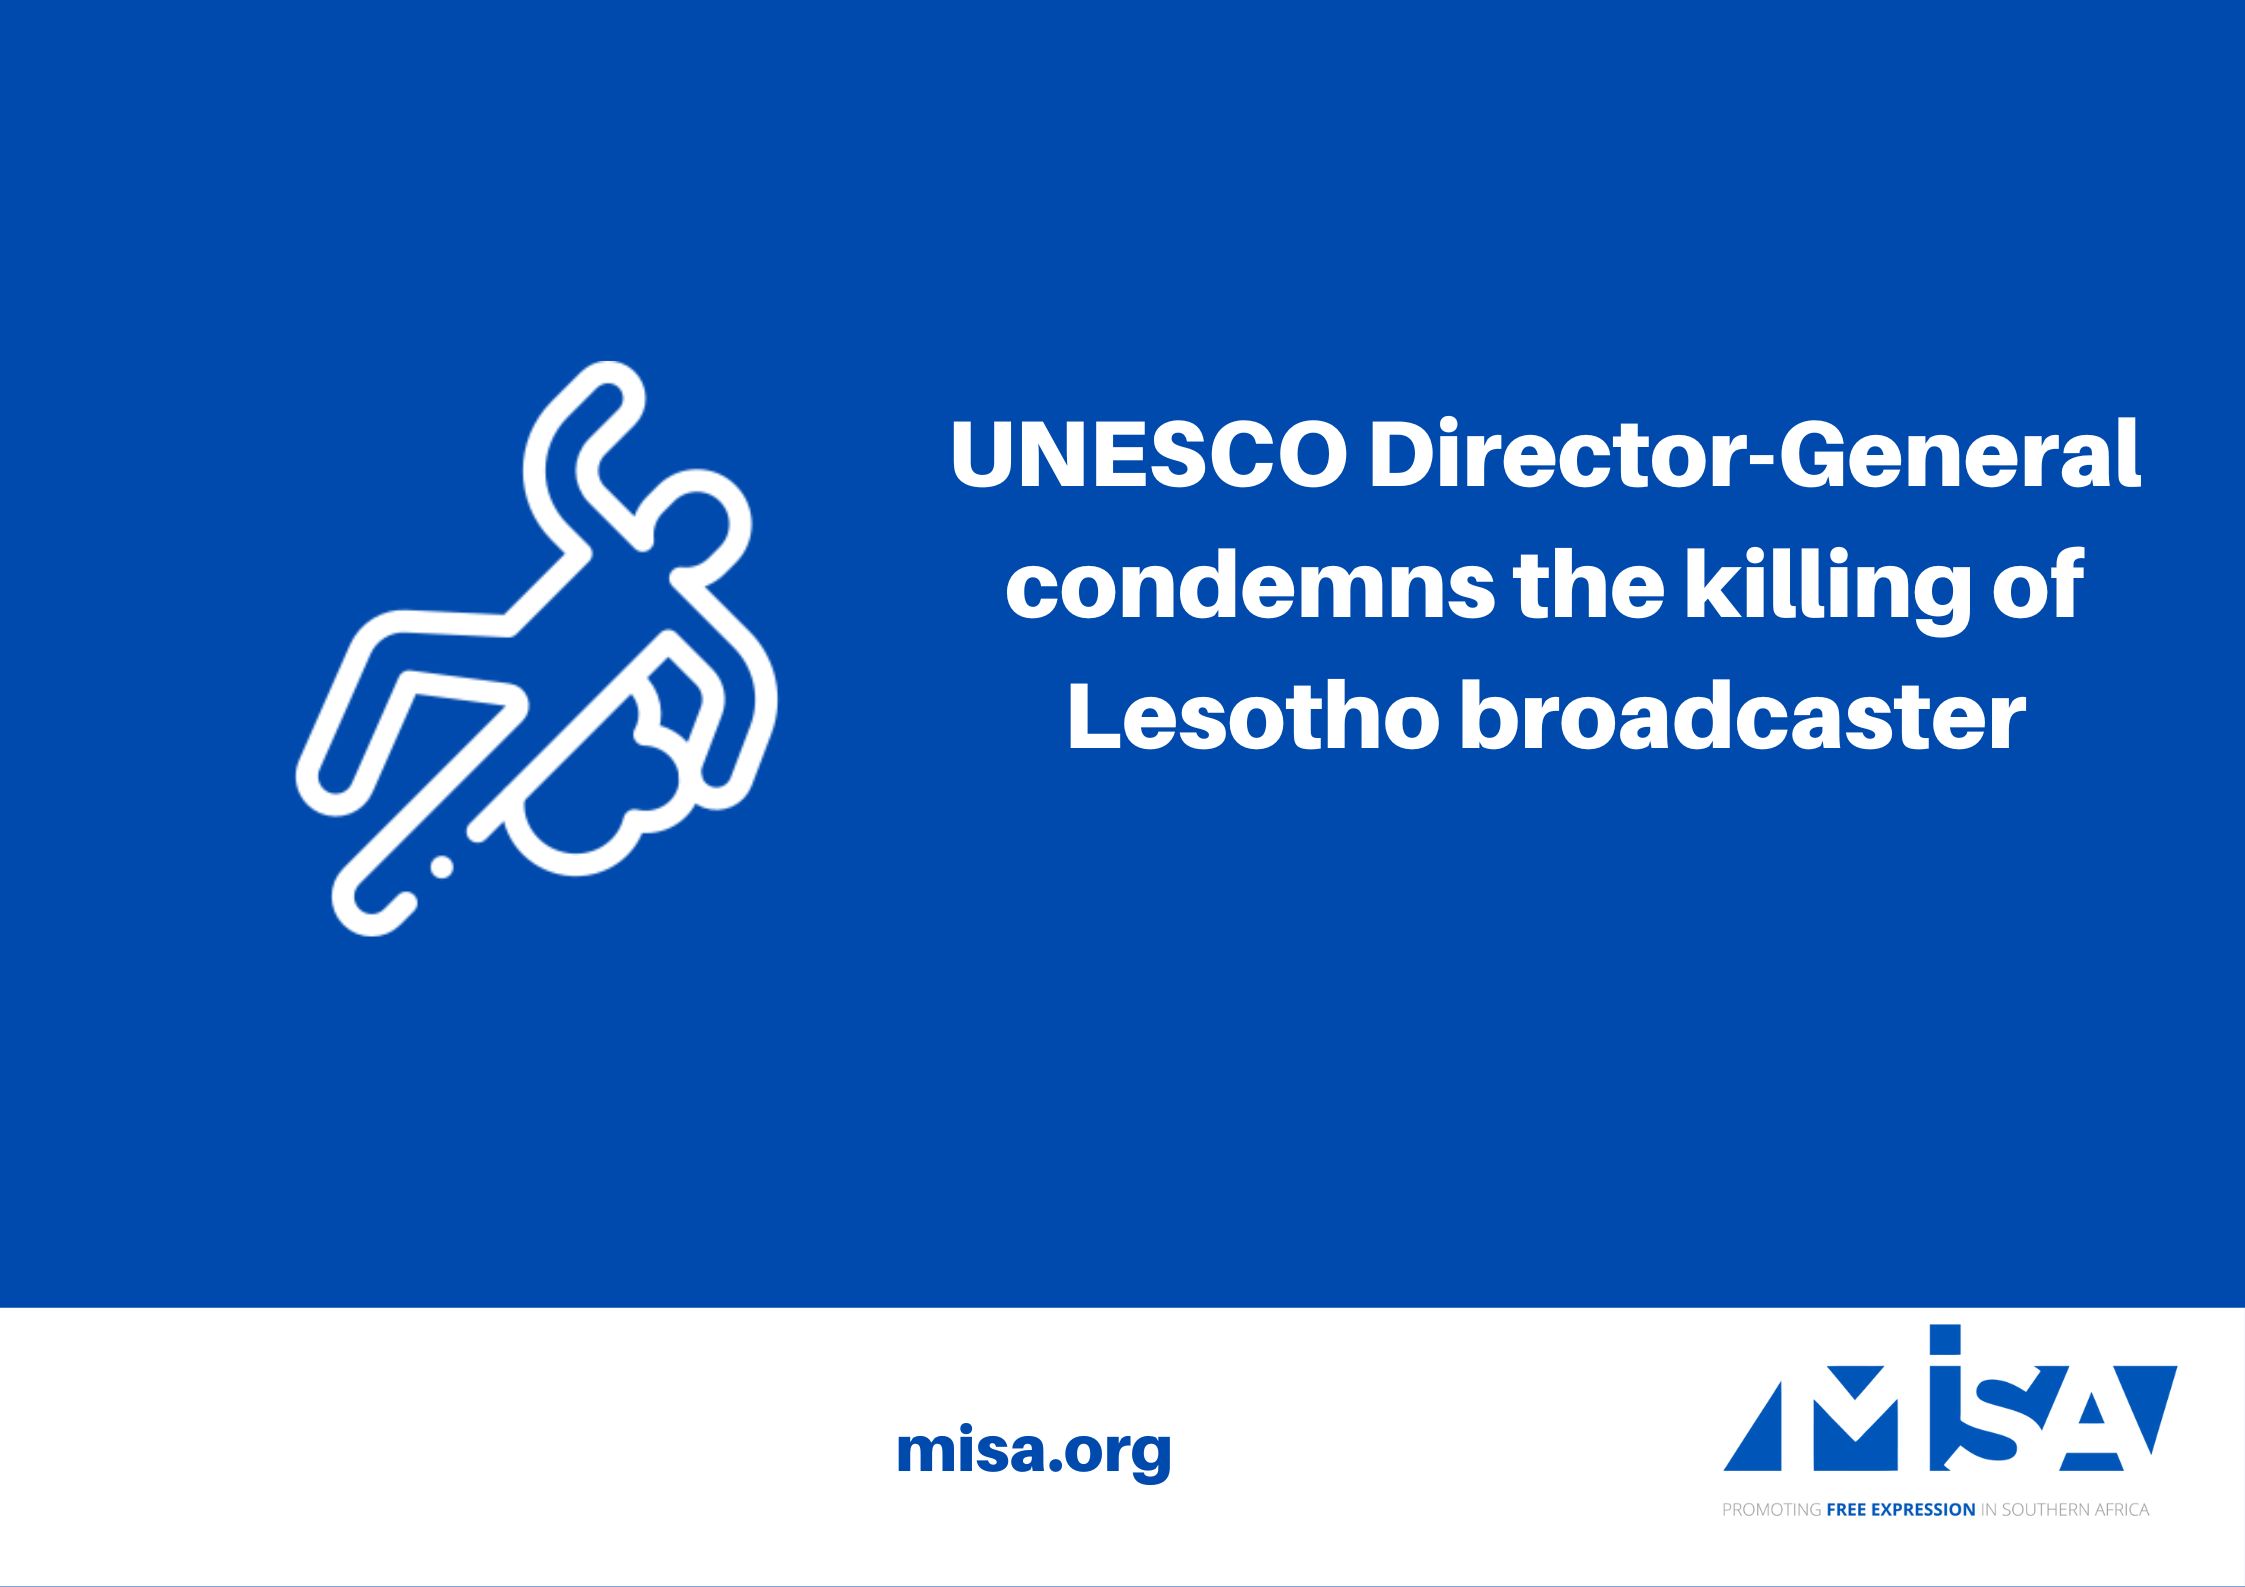 UNESCO Director-General condemns the killing of Lesotho broadcaster